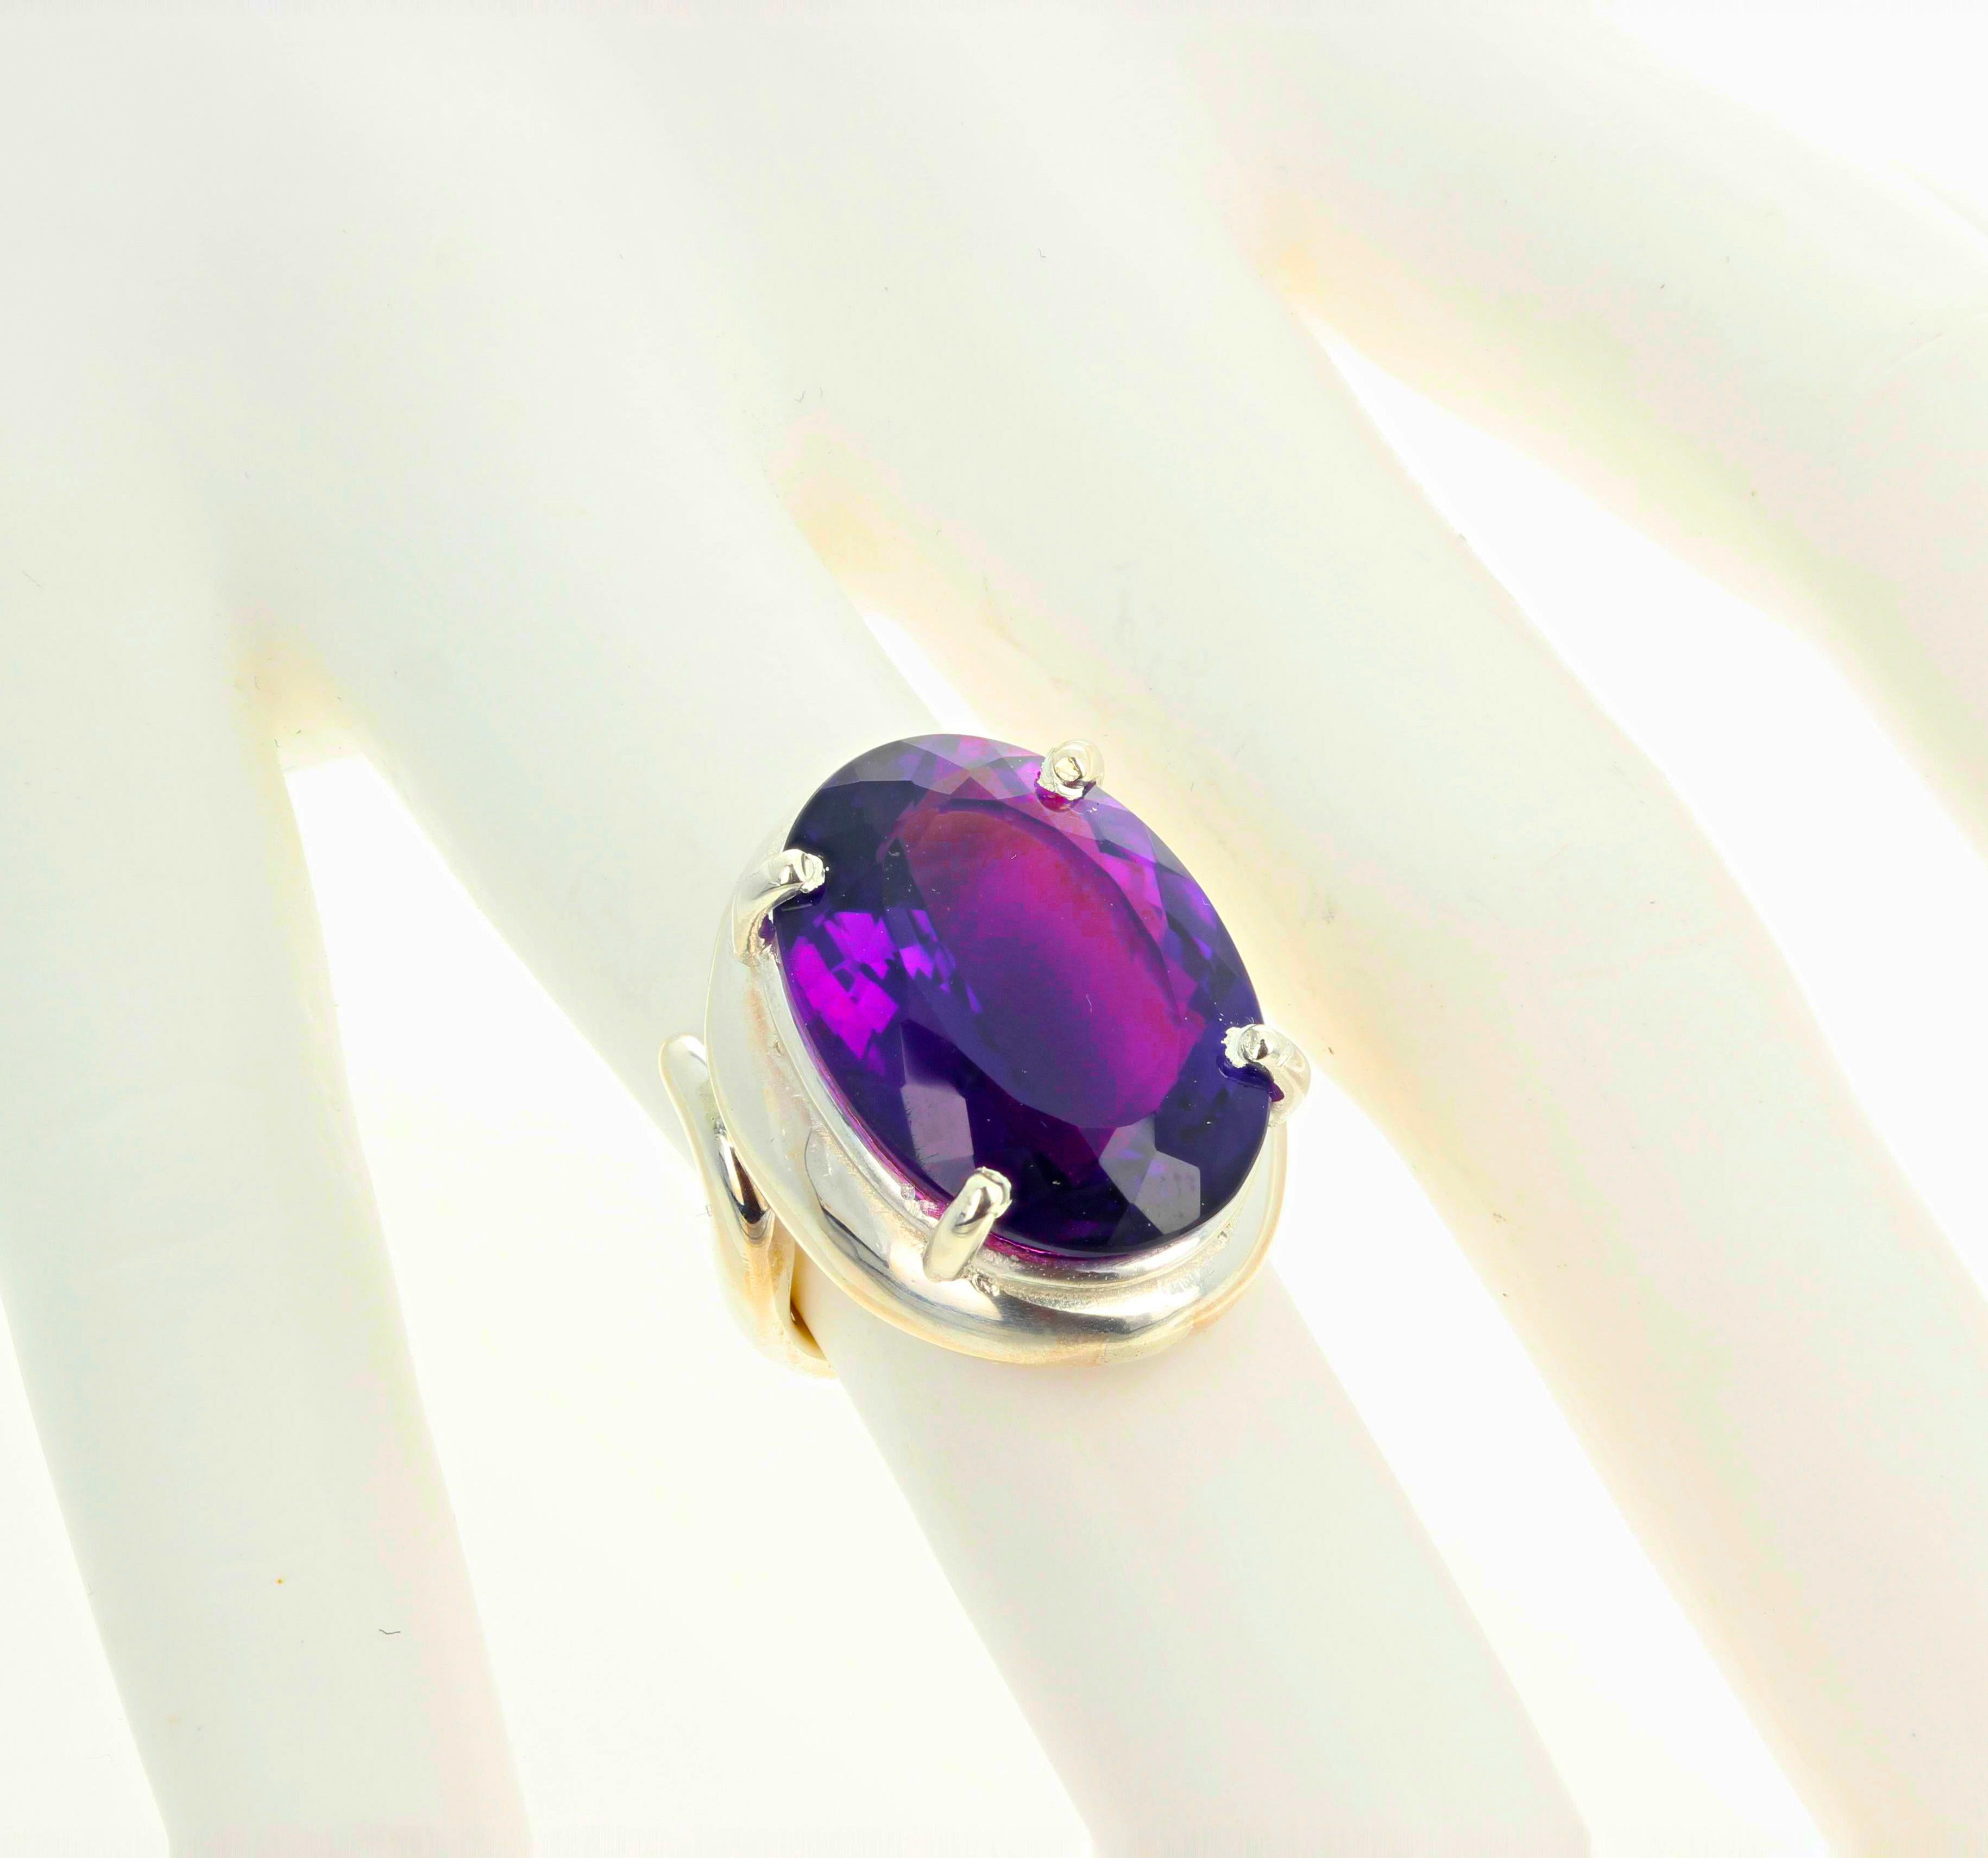 This beautiful 16.15 carat Amethyst - 20 mm x 15 mm - sits up royally in this lovely unique sterling silver ring size 6 (sizable for free). This is huge a absolutely gorgeous.